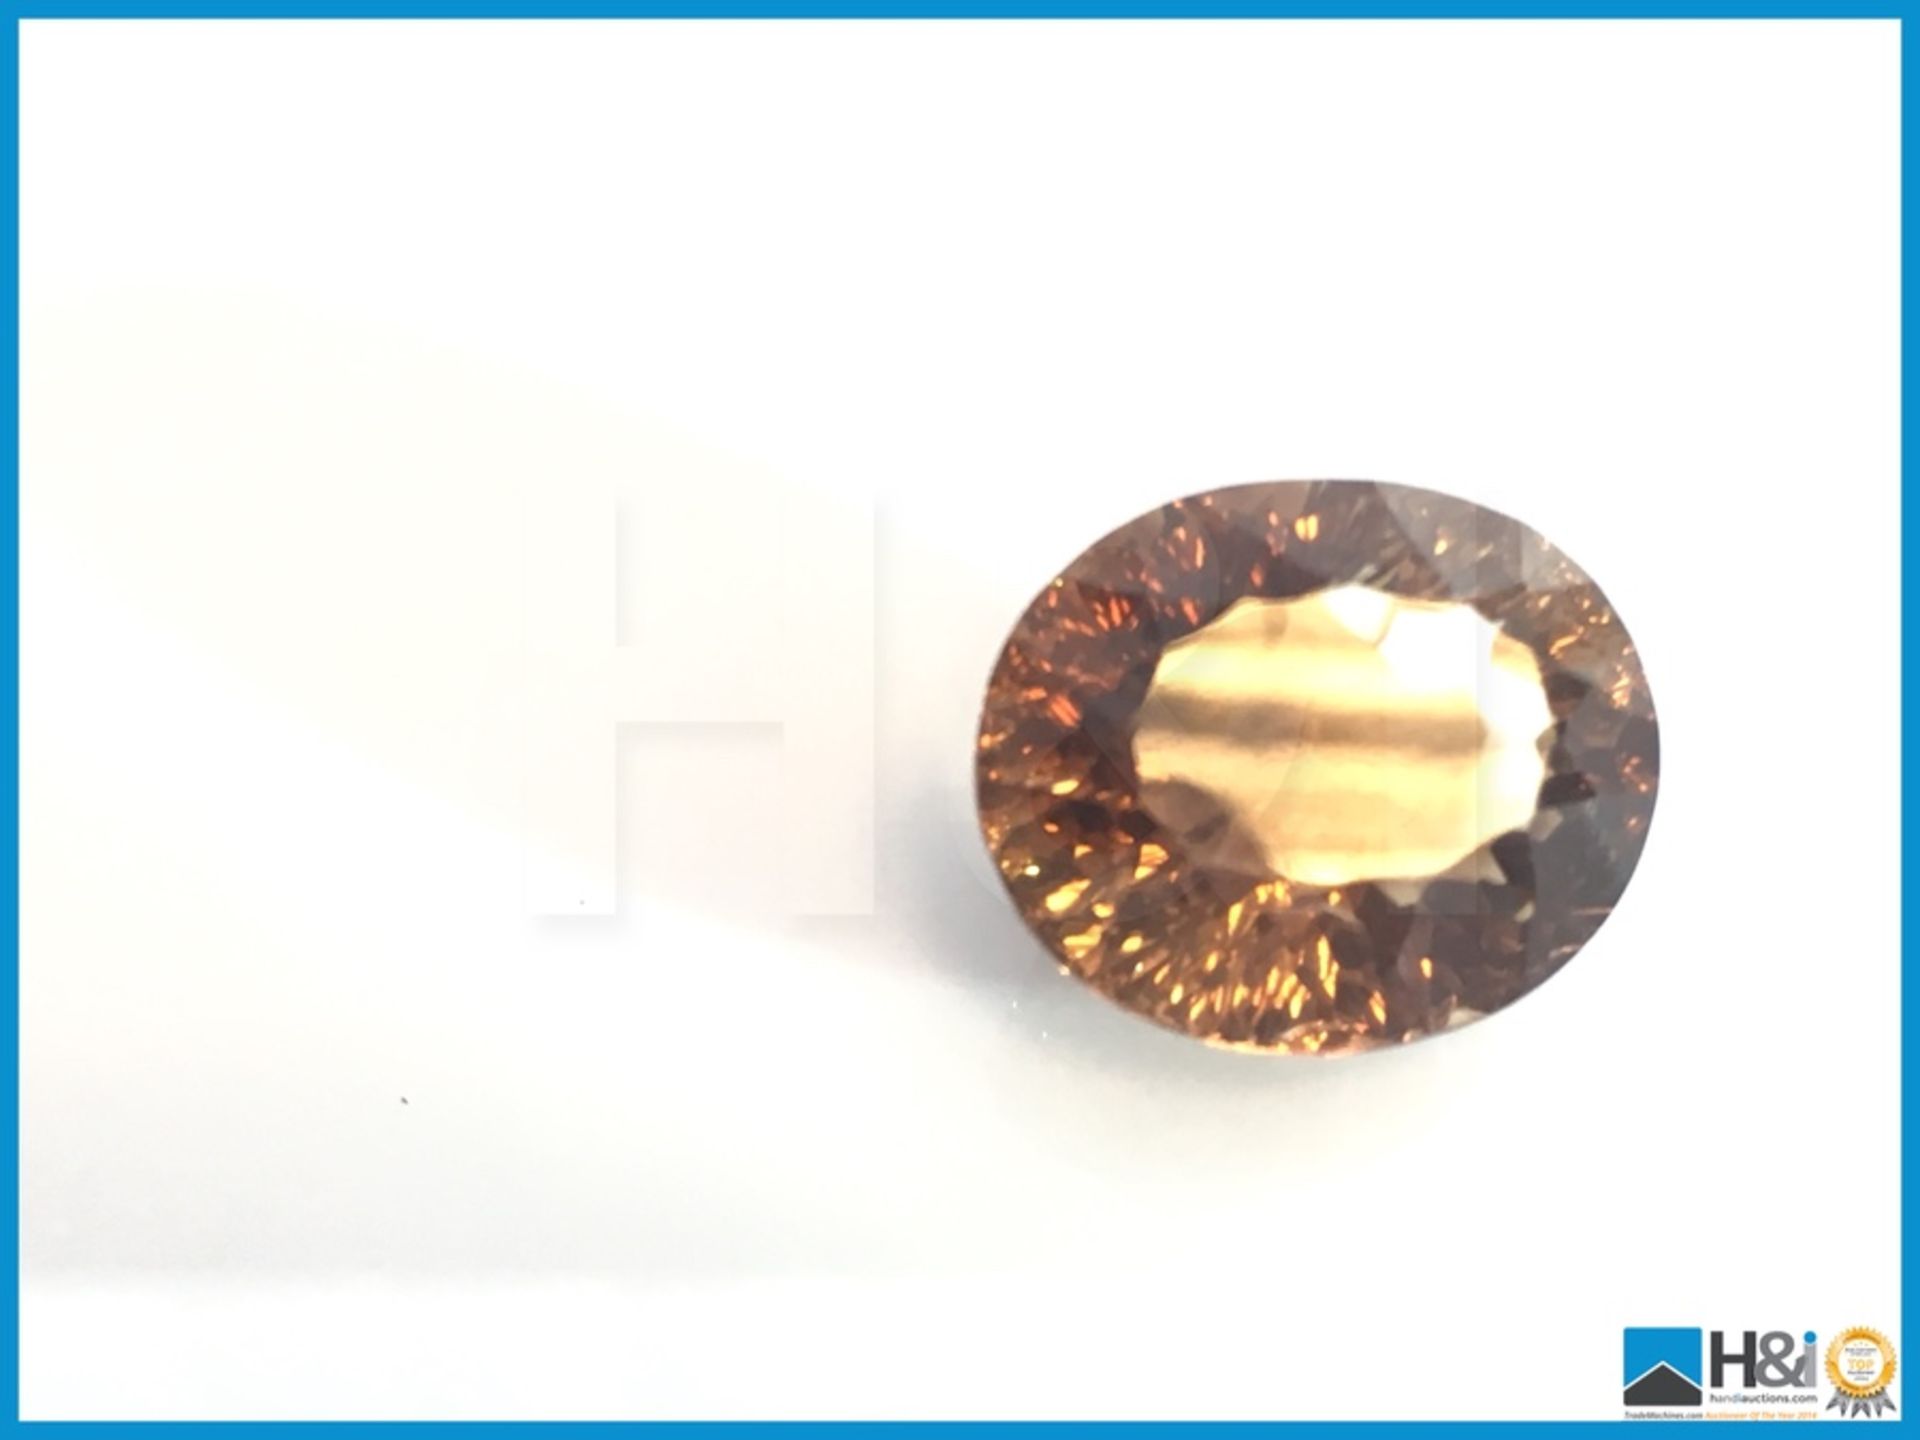 13.56ct Natural Topaz.Oval Facetted Cut in Yellowish Brown. Transparrent with GIL Certificate 14.